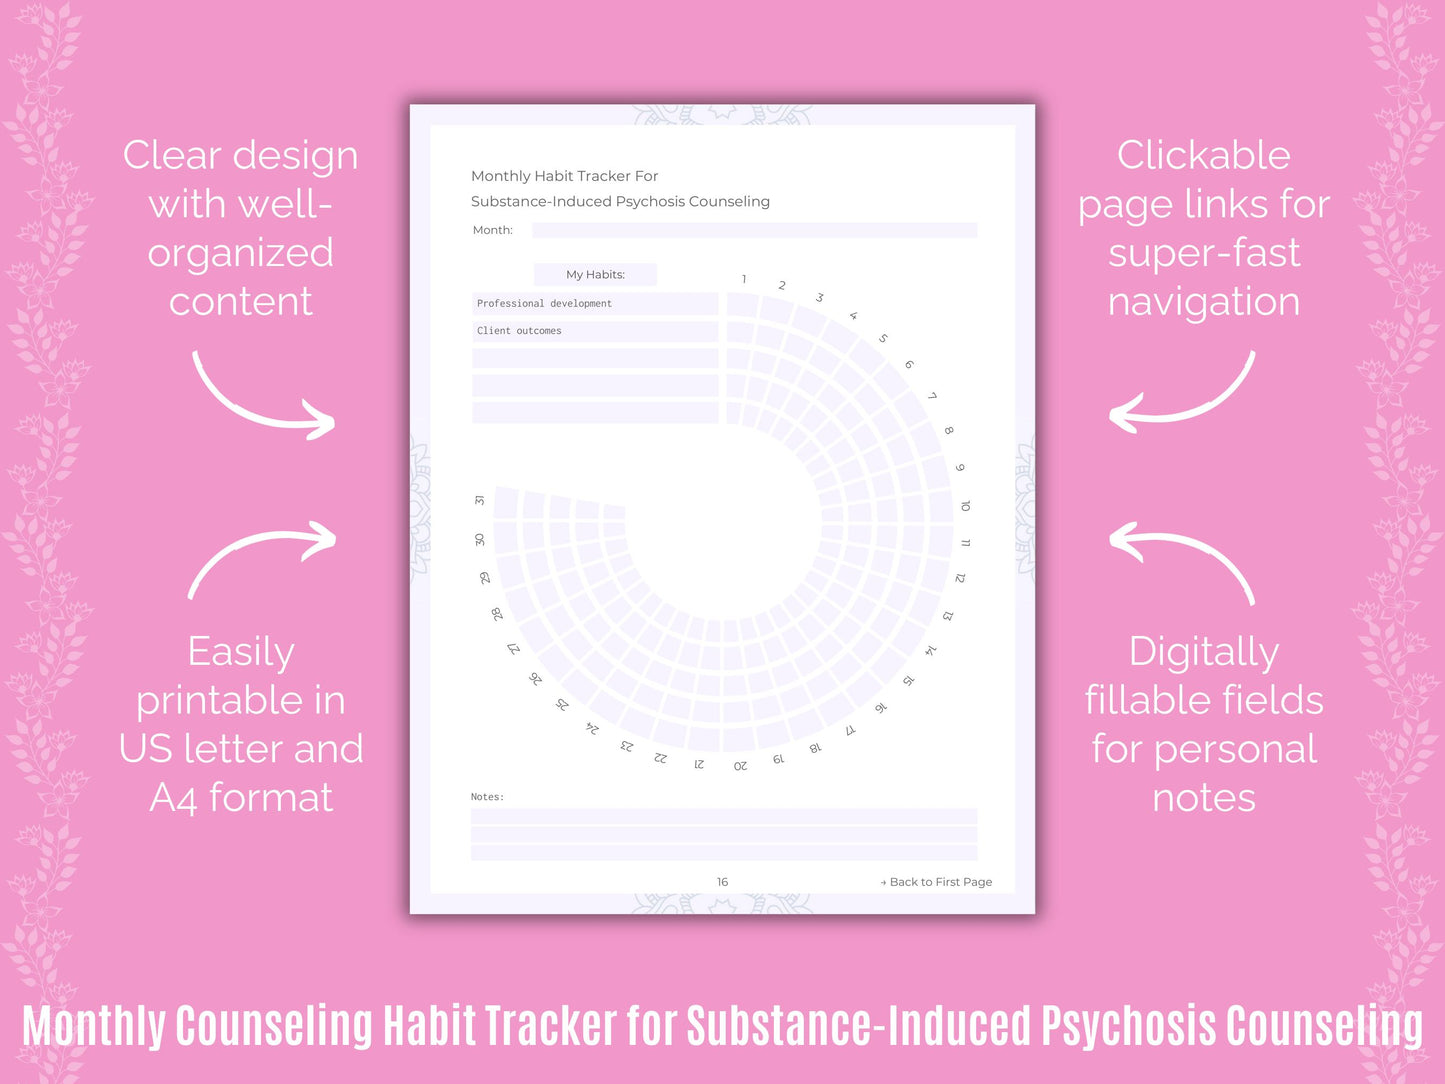 Substance-Induced Psychosis Counseling